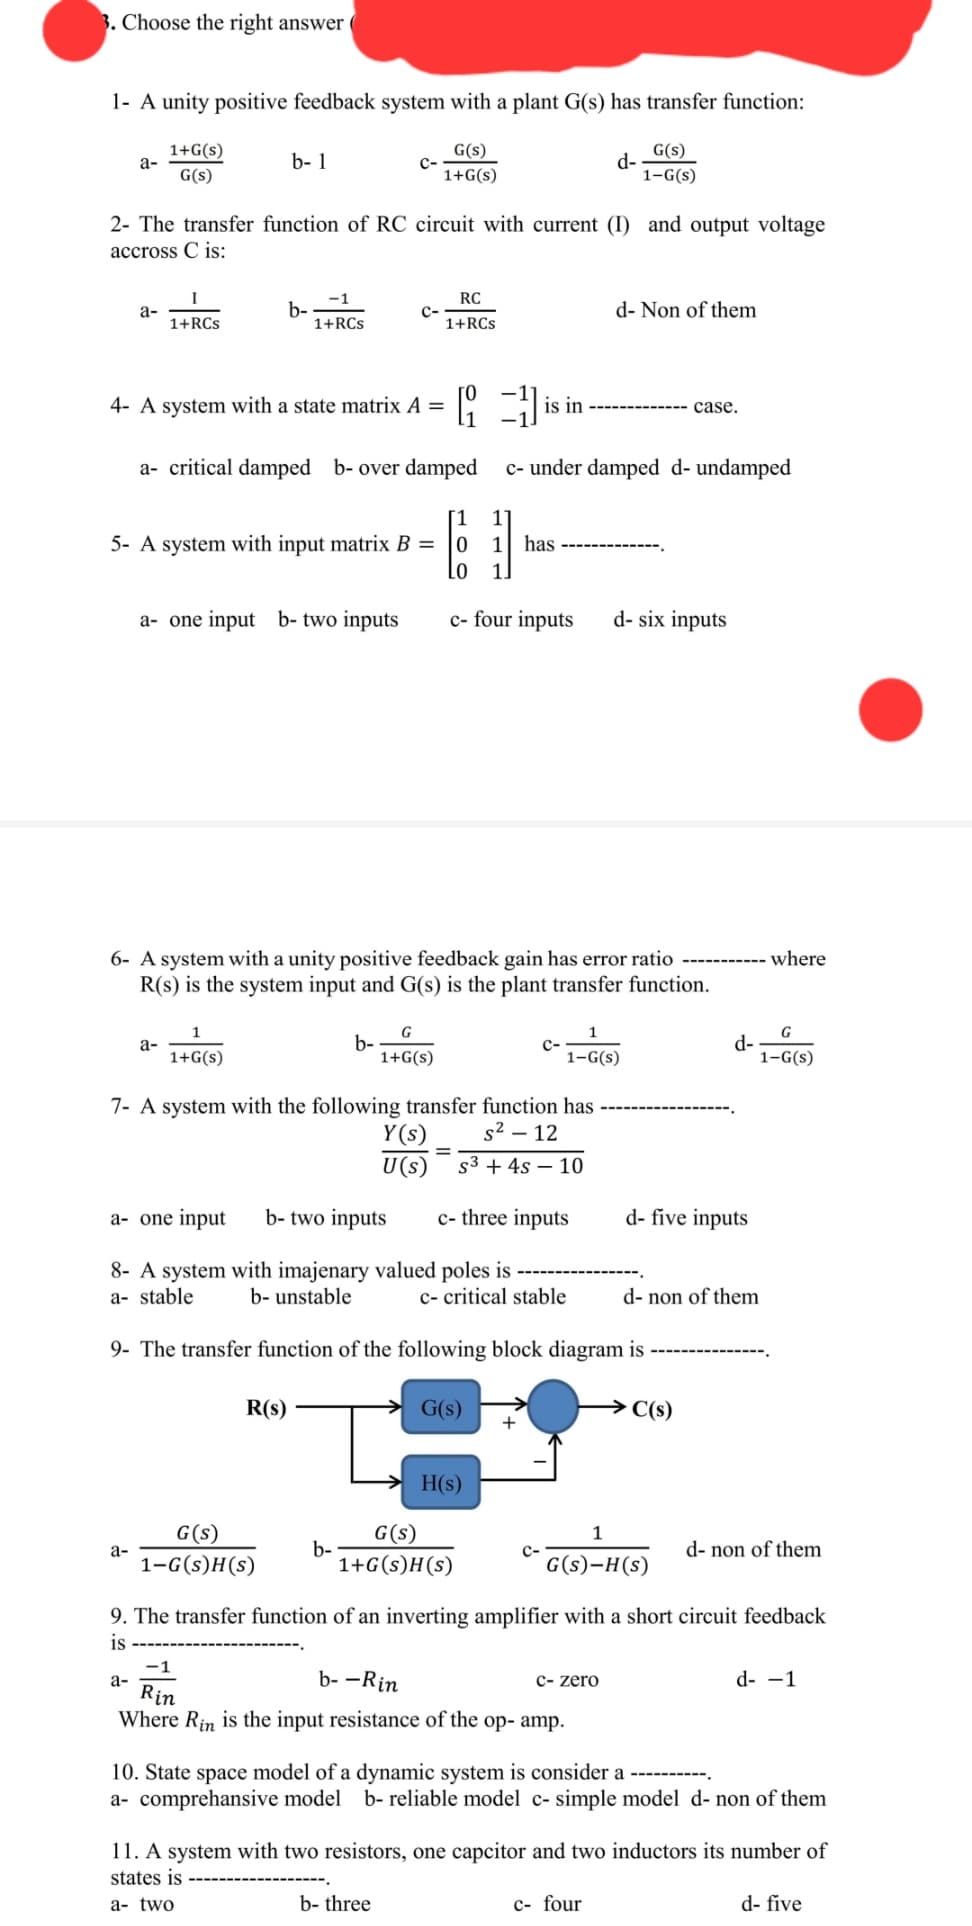 3. Choose the right answer
1- A unity positive feedback system with a plant G(s) has transfer function:
1+G(s)
G(s)
G(s)
1+G(s)
a-
a-
2- The transfer function of RC circuit with current (I) and output voltage
accross C is:
I
1+RCs
a-
b- 1
a-
a-
b-
4- A system with a state matrix A =
a- critical damped b- over damped
5- A system with input matrix B =
a- one input b- two inputs
1
1+G(s)
-1
1+RCs
R(s)
G(s)
1-G(s)H(s)
C-
C-
b-
b-
6- A system with a unity positive feedback gain has error ratio
R(s) is the system input and G(s) is the plant transfer function.
RC
1+RCs
G
1+G(s)
7- A system with the following transfer function has
s² - 12
S³ + 4s 10
Y(s)
U(s)
b- three
is
is in
1
1 has
a- one input b- two inputs
8- A system with imajenary valued poles is
a- stable
b- unstable
c- critical stable
9- The transfer function of the following block diagram is
G(s)
1
0
LO 1.
c- four inputs d-six inputs
H(s)
G(s)
1+G(s)H(s)
c- under damped d- undamped
c- three inputs
d-
+
1
1-G(s)
G(s)
1-G(s)
d- Non of them
-1
b--Rin
Rin
Where Rin is the input resistance of the op- amp.
c- zero
case.
1
G(s)-H(s)
c- four
d-five inputs
→→C(s)
d-
d- non of them
9. The transfer function of an inverting amplifier with a short circuit feedback
is
where
G
1-G(S)
d- non of them
10. State space model of a dynamic system is consider a
a- comprehensive model b- reliable model c- simple model d- non of them
d- -1
11. A system with two resistors, one capcitor and two inductors its number of
states is
a- two
d- five